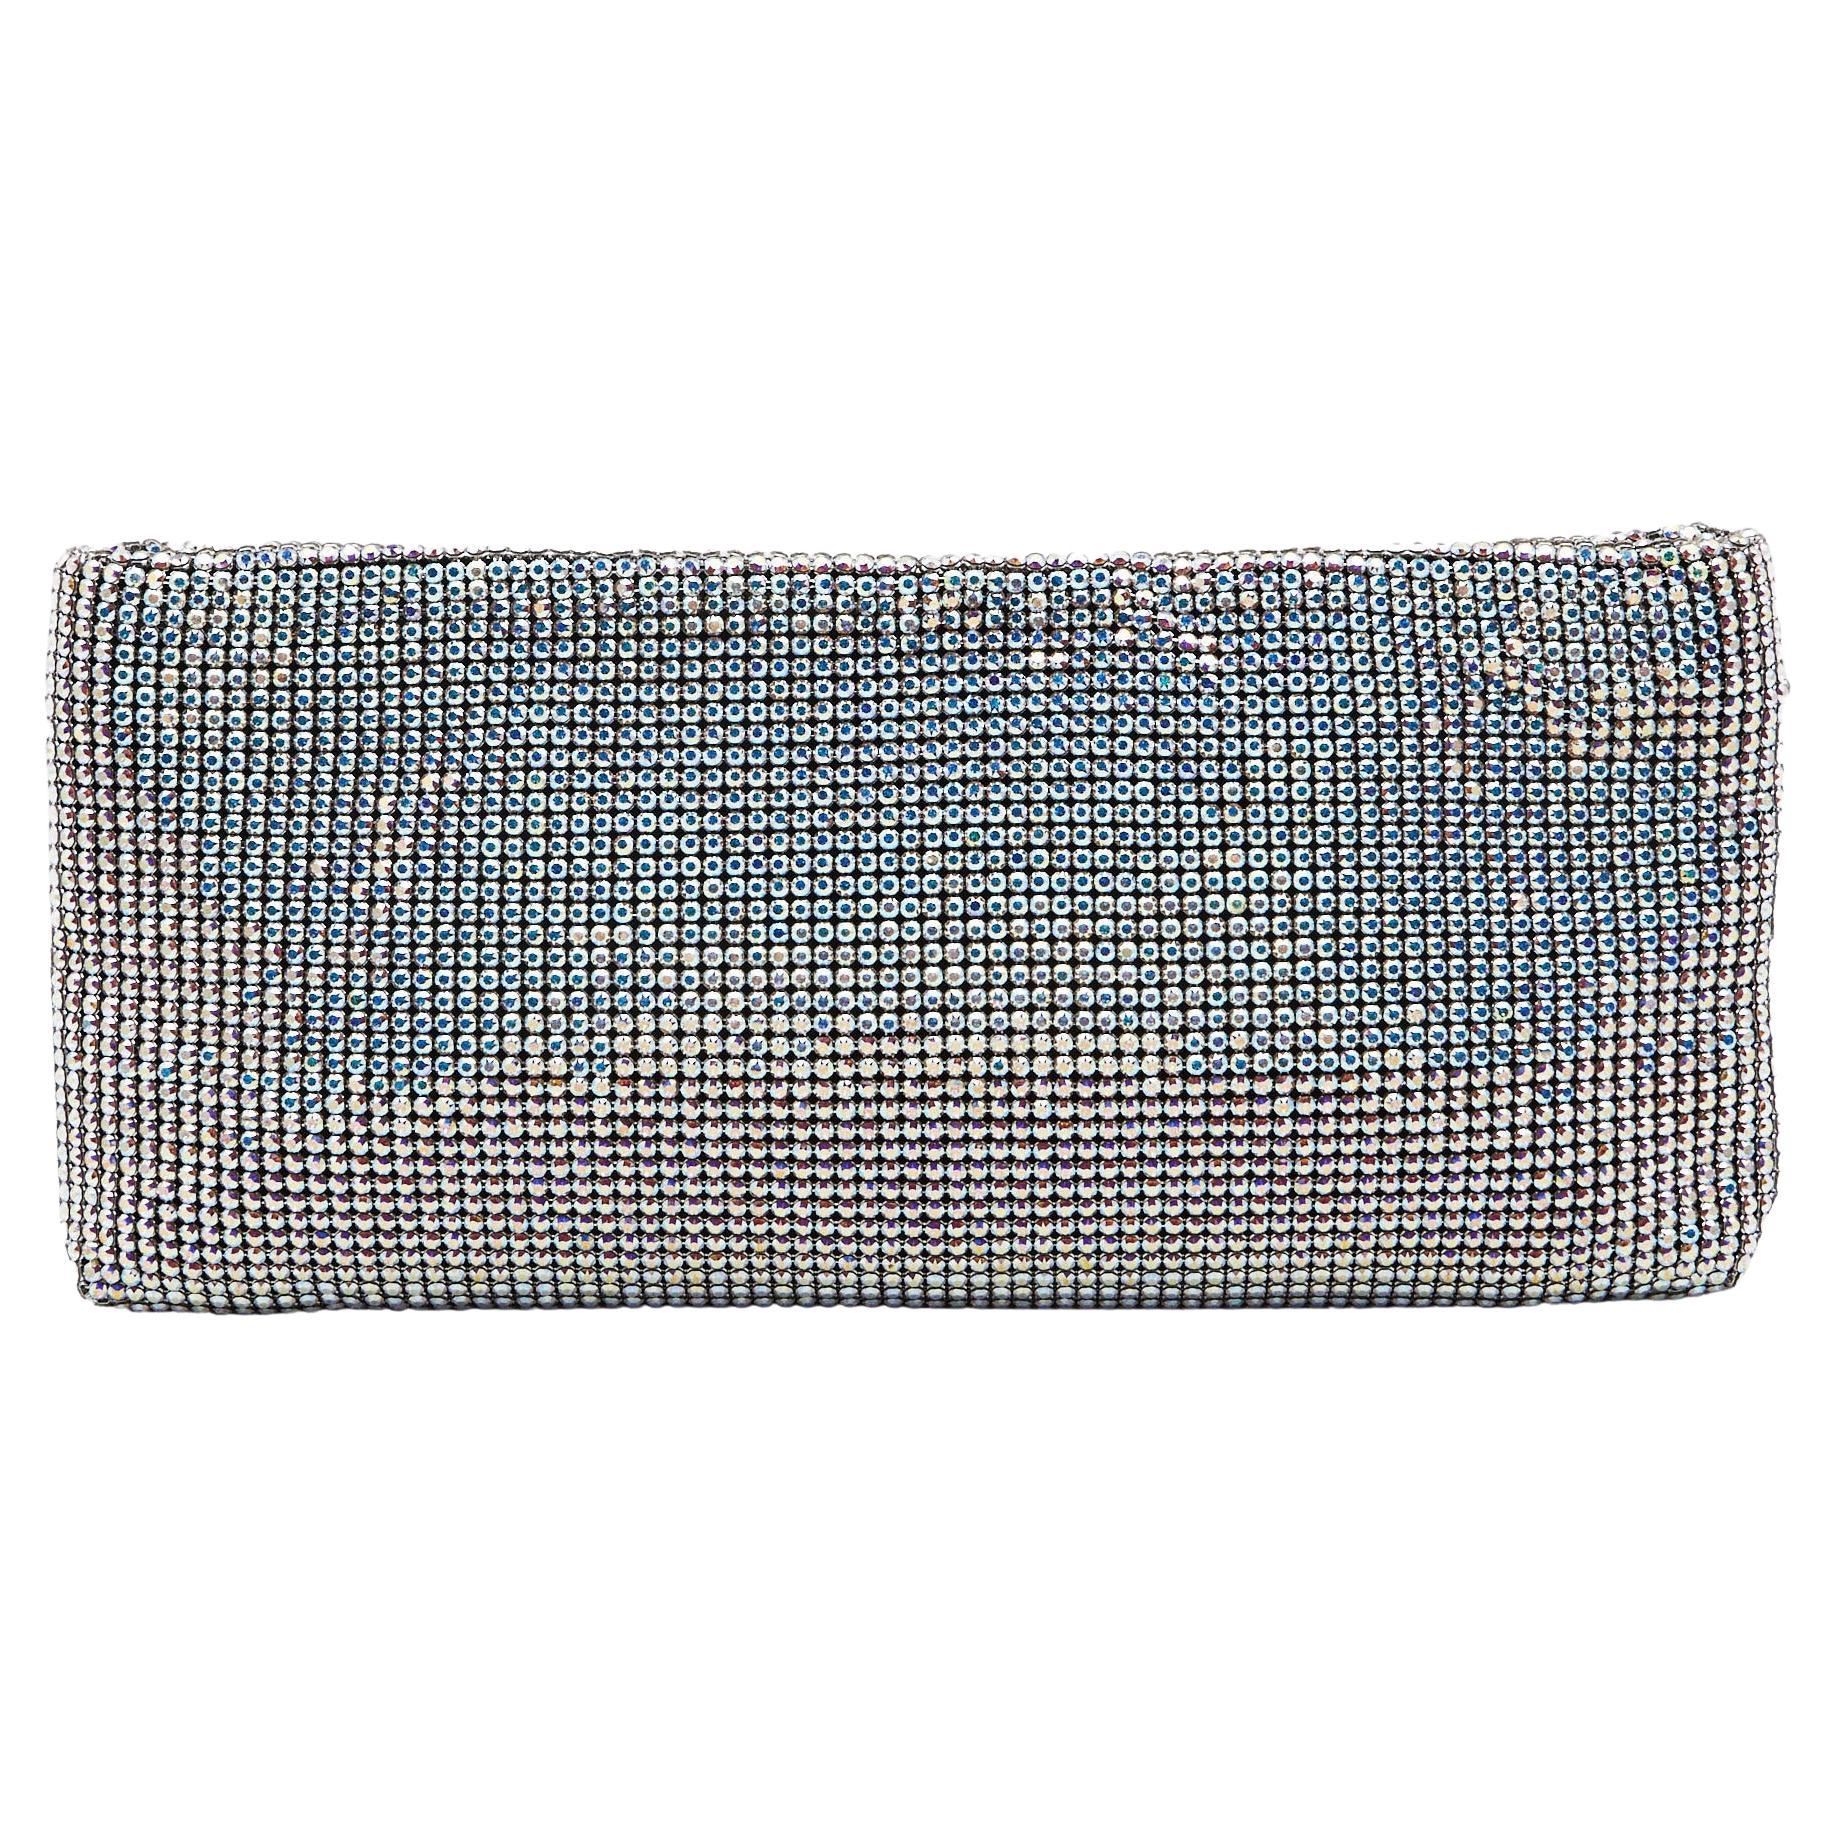 Christian Louboutin Multicolor Crystal Maykimay Strass Clutch